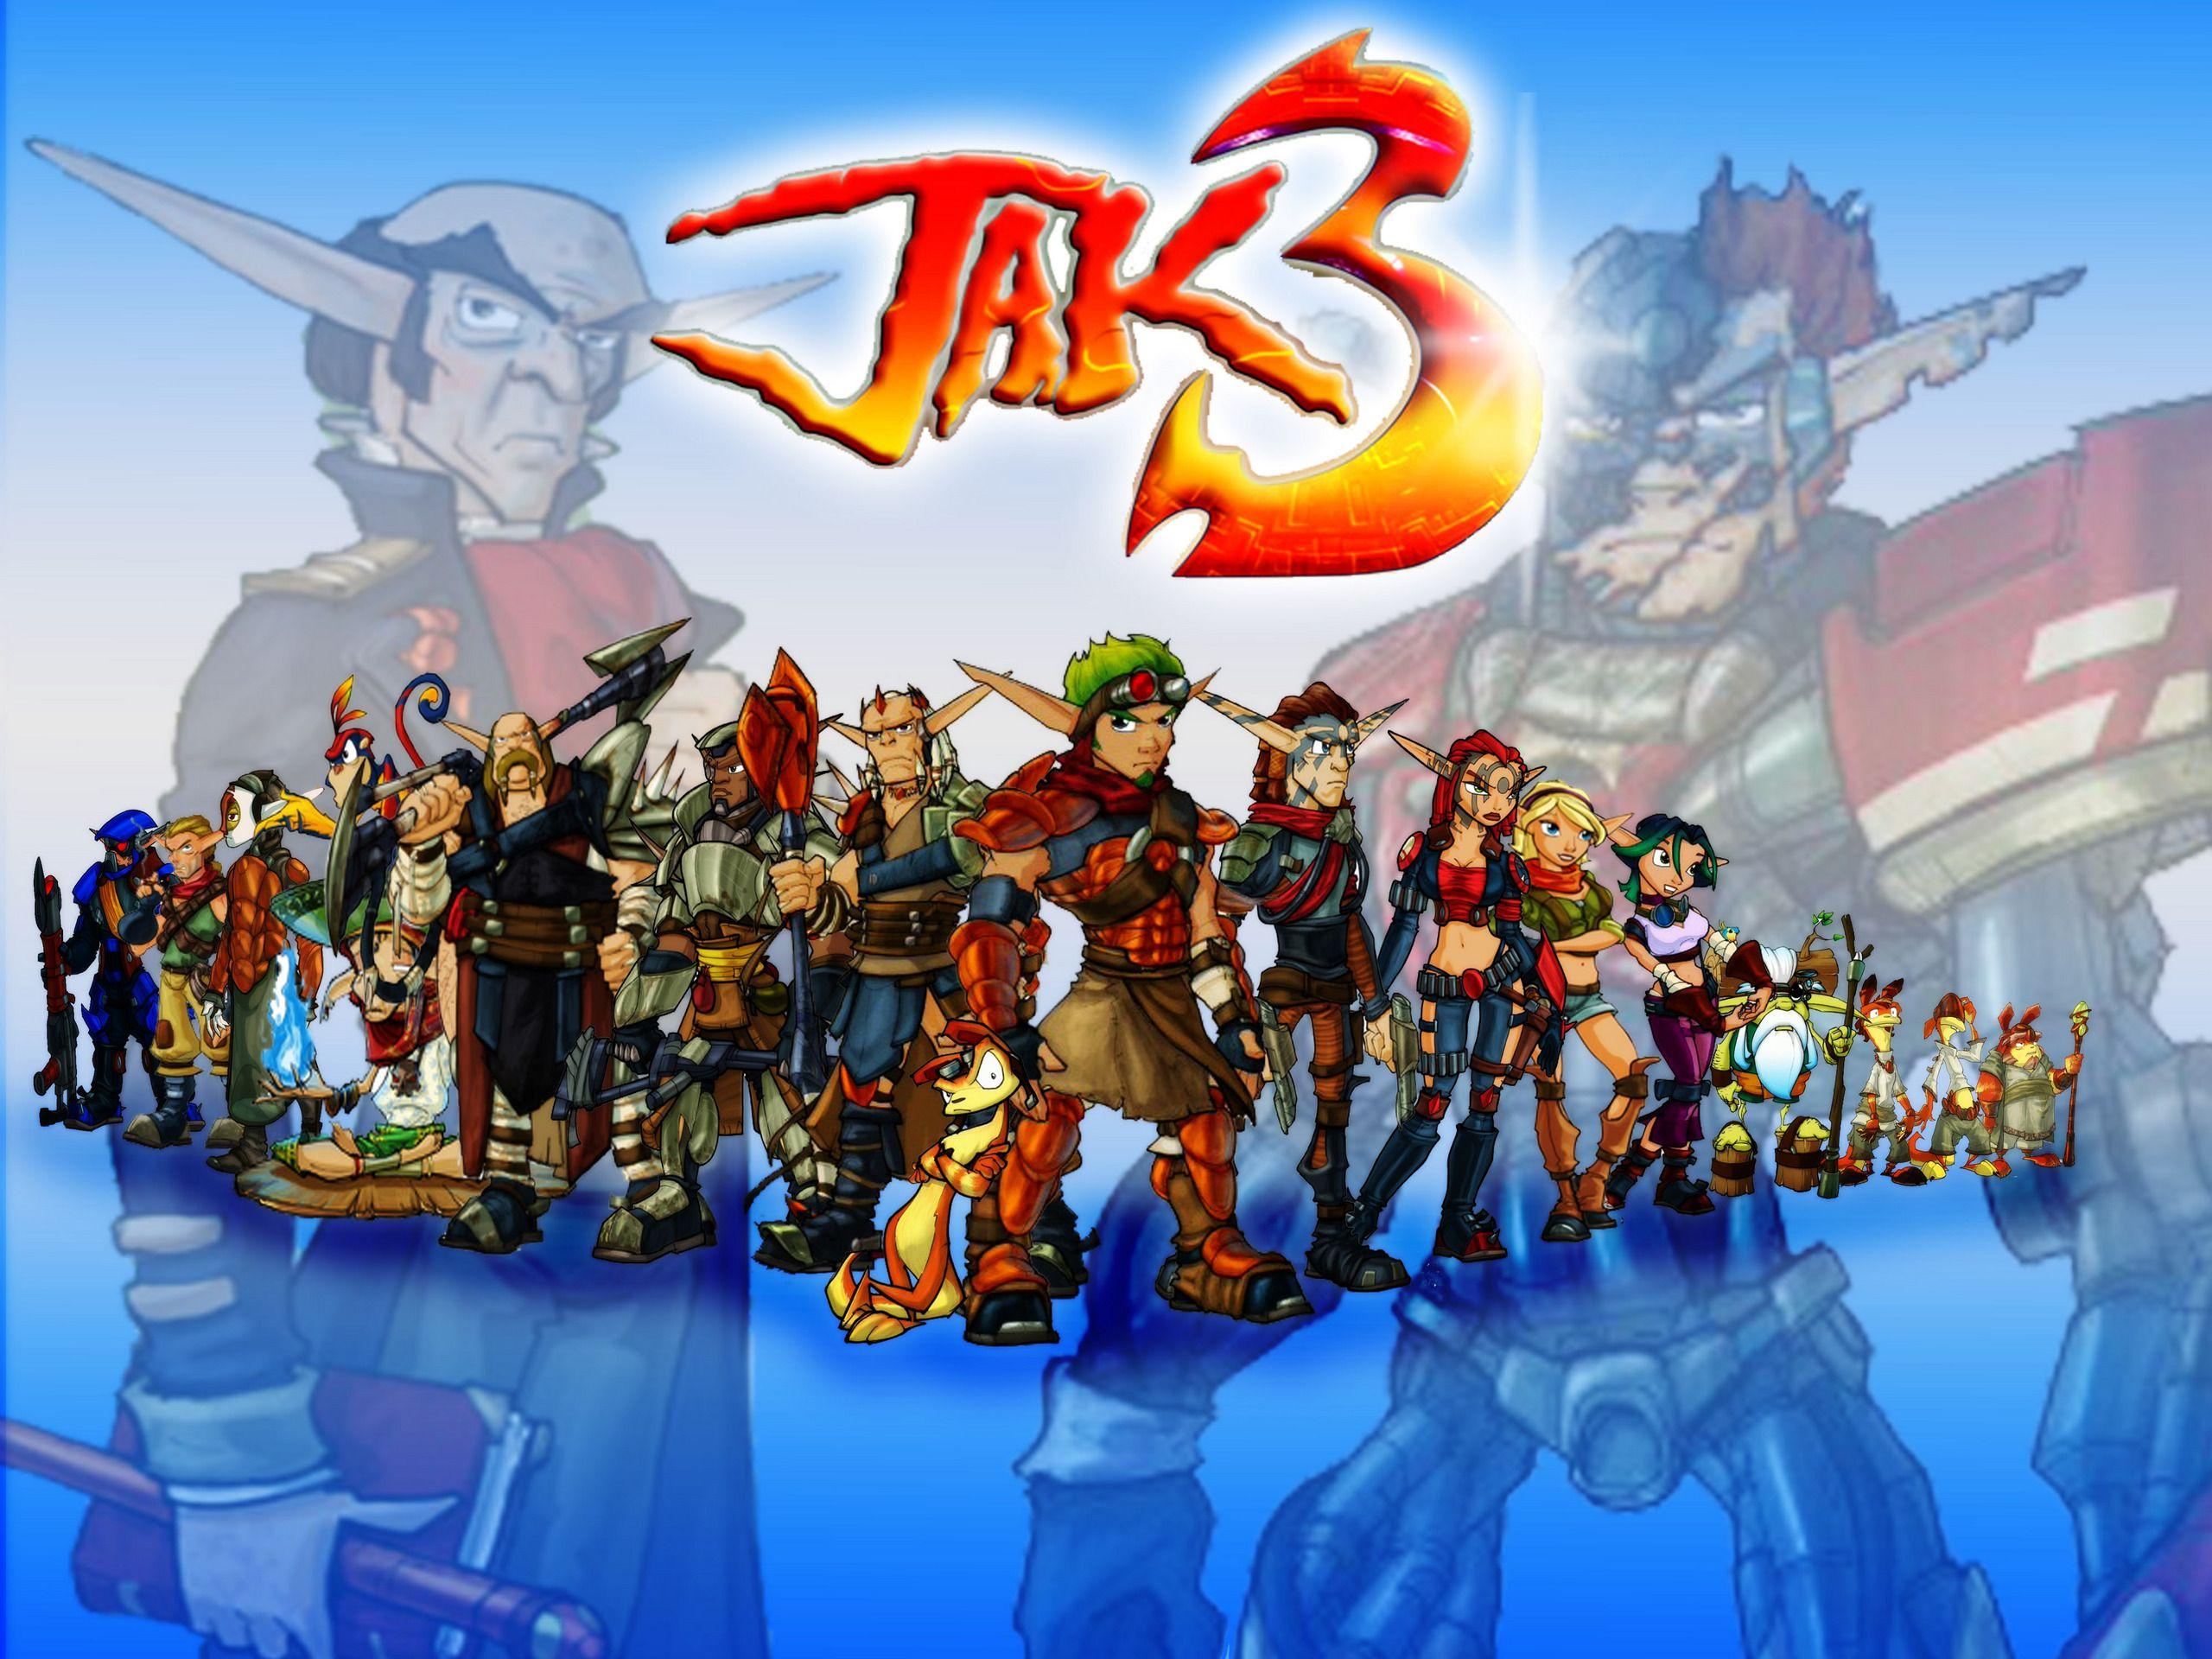 Games for 3 people. Джек и Декстер. Jak and Daxter 3. Jack and Dexter 3. Jack 3 ps2.